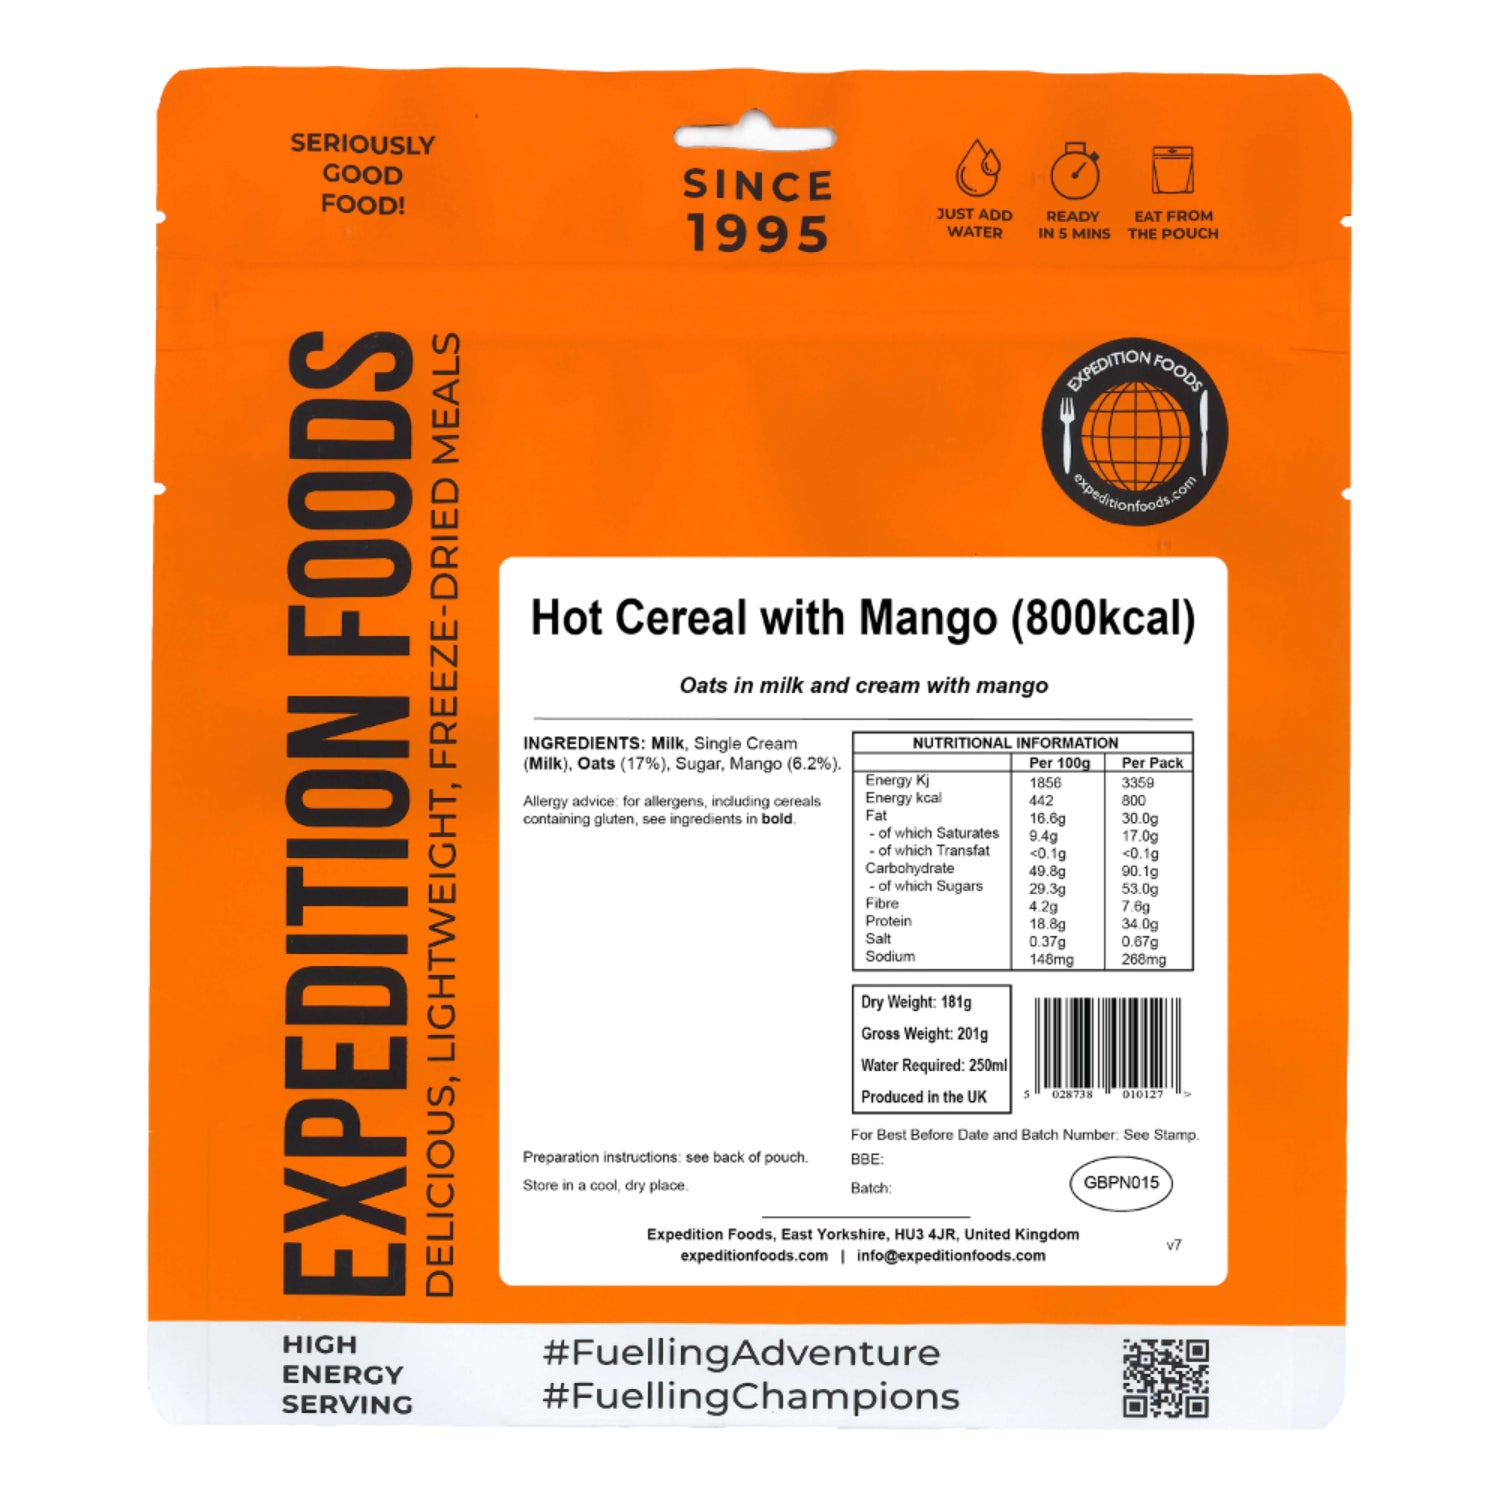 Expedition Foods Hot Cereal with Mango (800kcal) pack